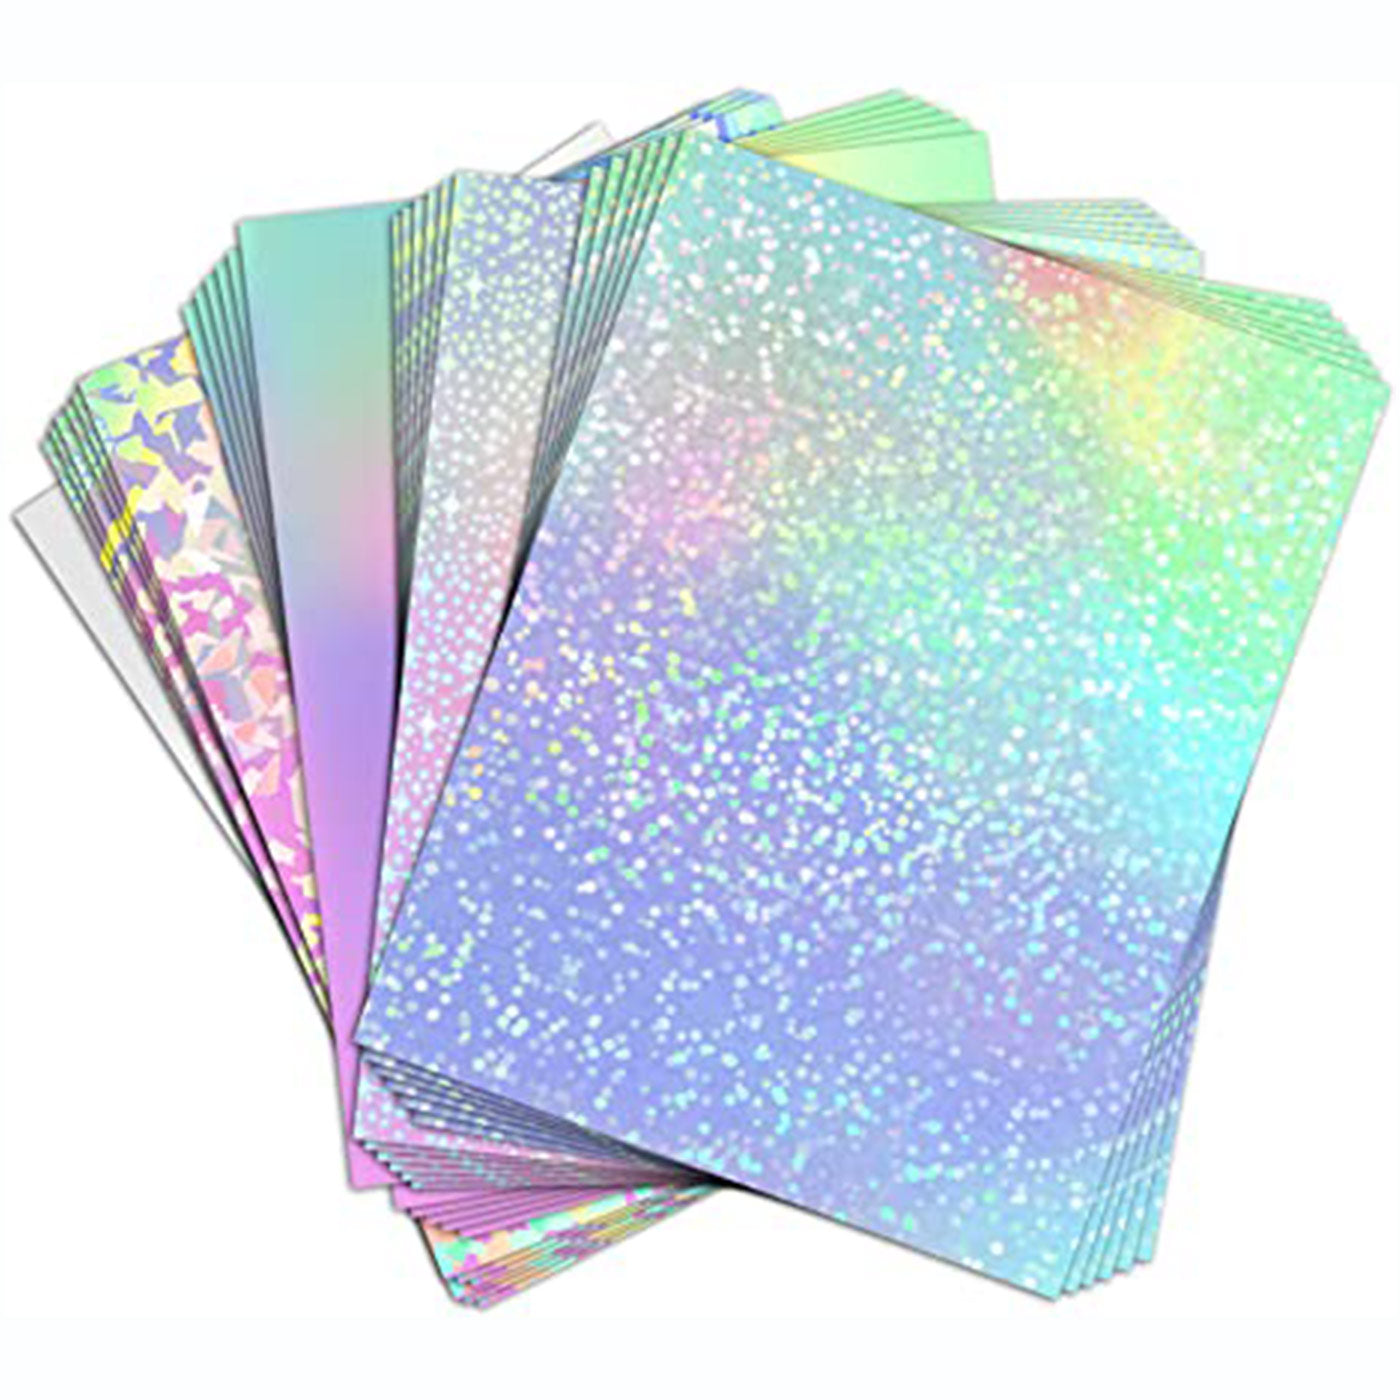 36 Sheets Holographic Sticker Paper, Clear Vinyl Laminate Film for Stickers  Self-Adhesive, Transparent Overlay Lamination Sticker Paper Waterproof, 6